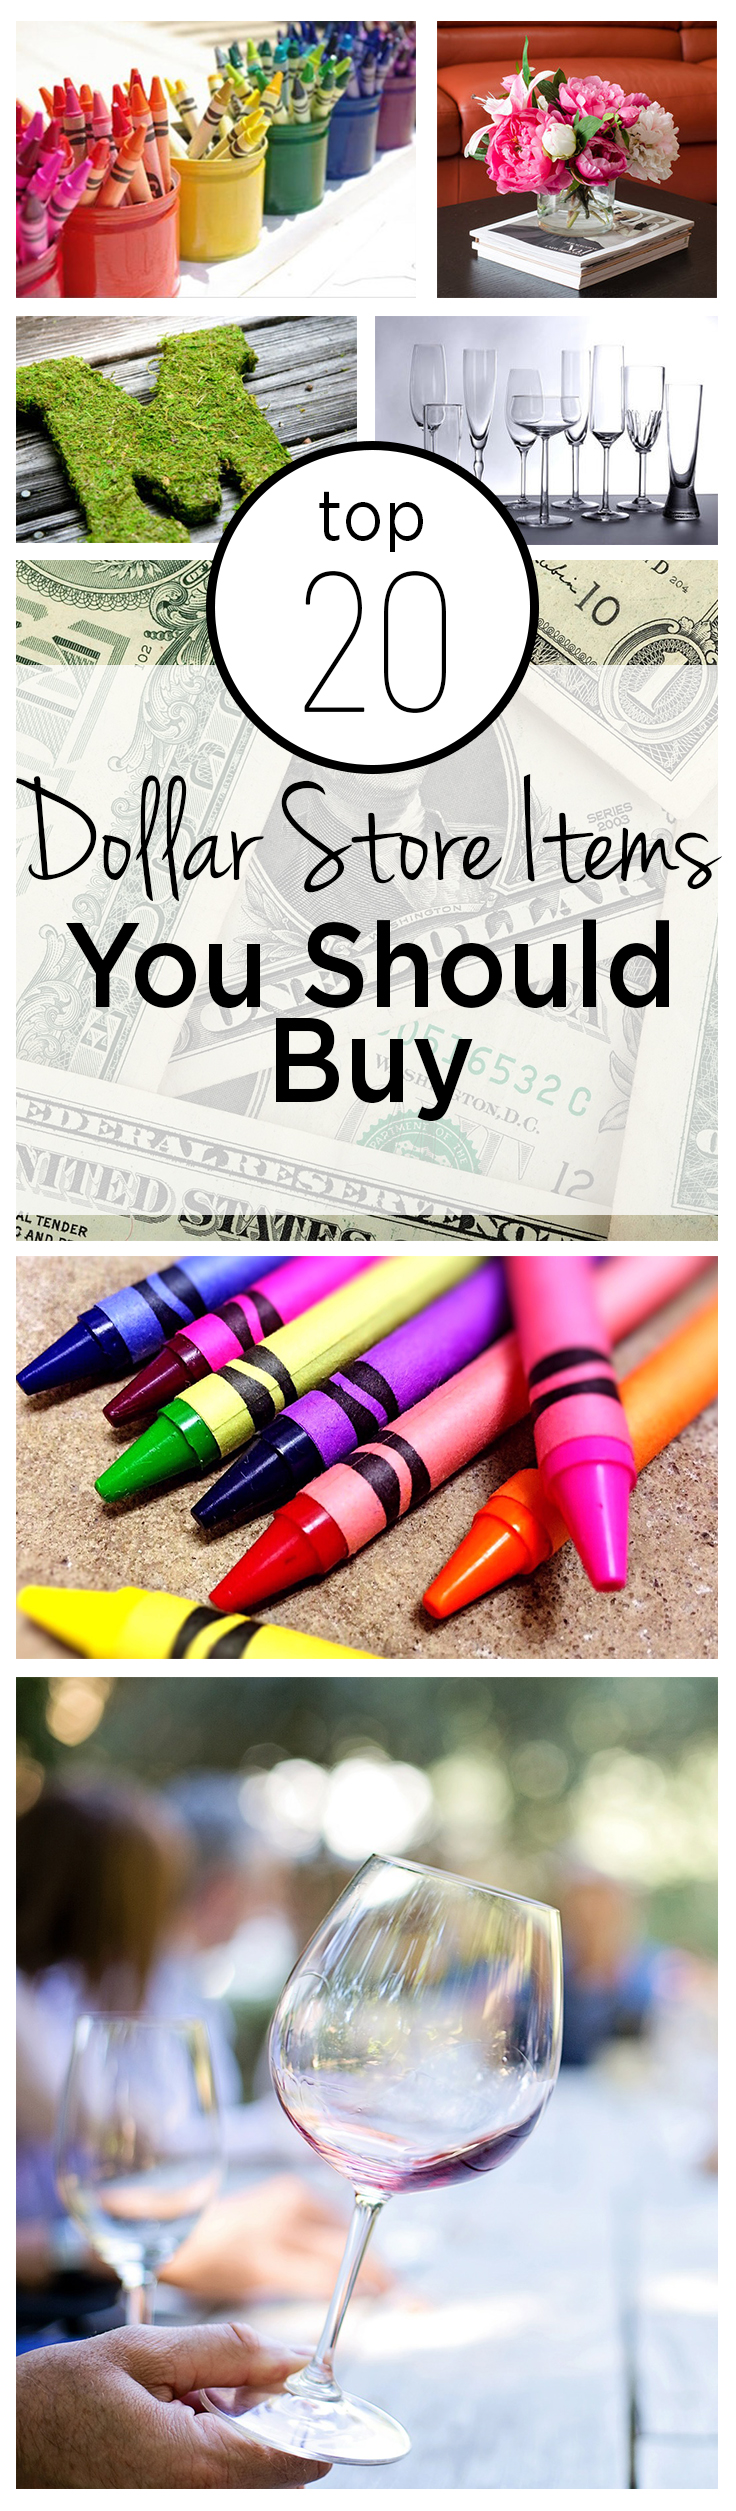 Top 20 Dollar Store Items You Should Buy